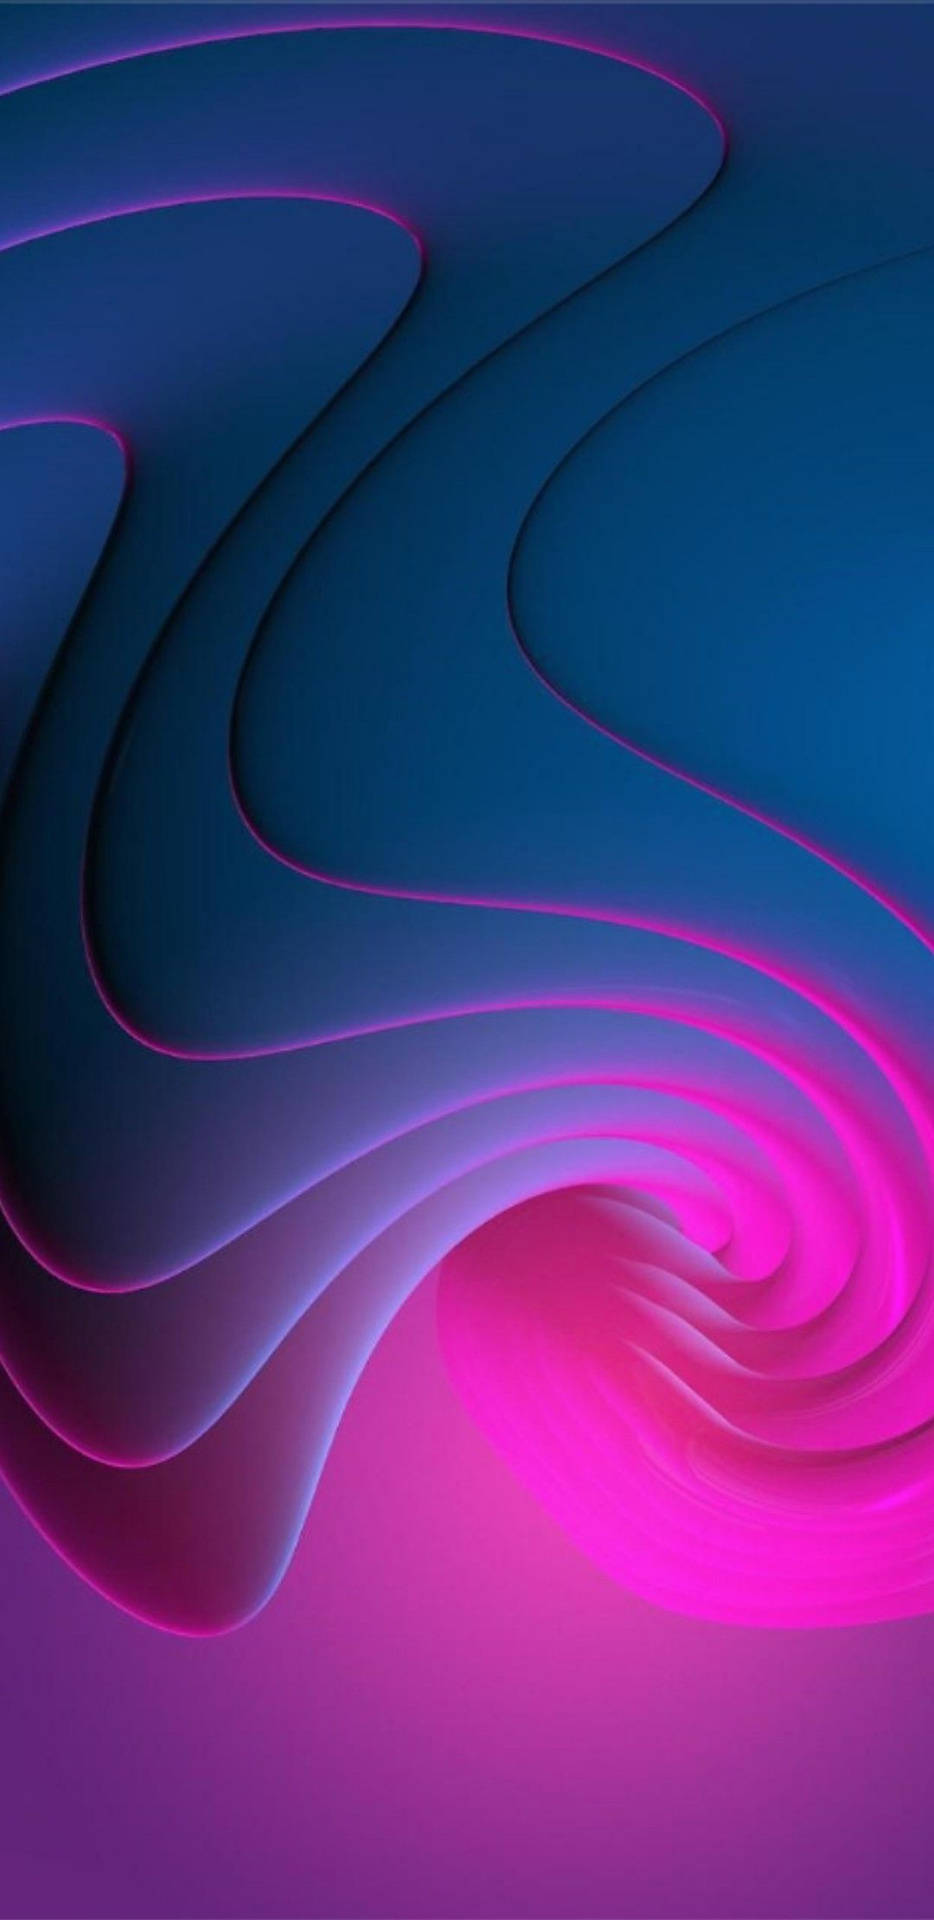 Pink And Blue Swirl Wallpaper